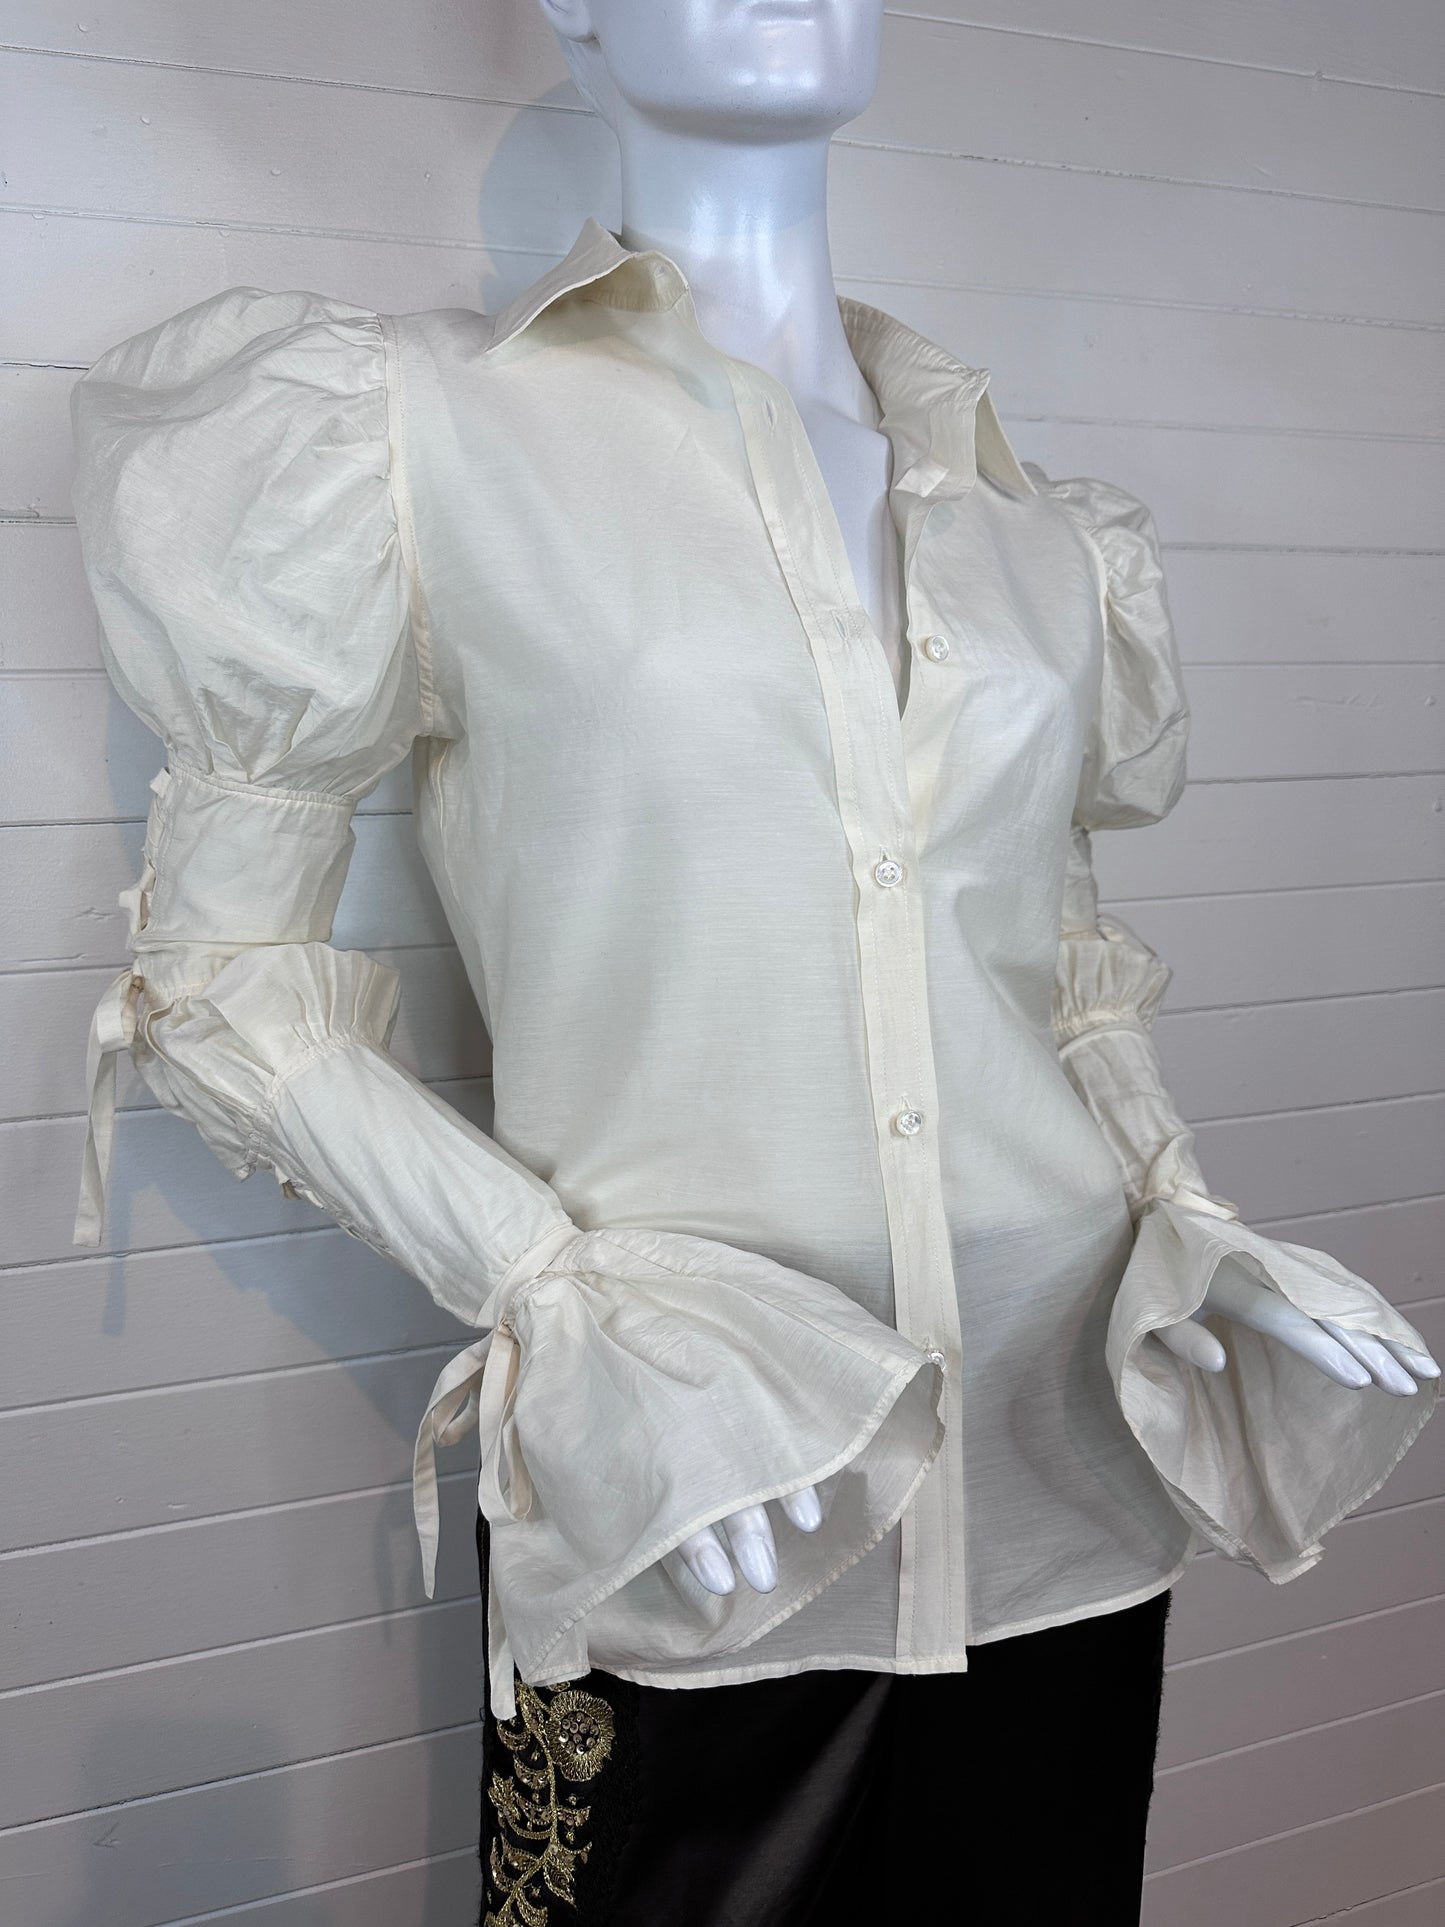 Yves Saint Laurent Rive Gauche Ivory Cotton and Silk Poet Blouse by Tom Ford F/W 2002 (FR36)